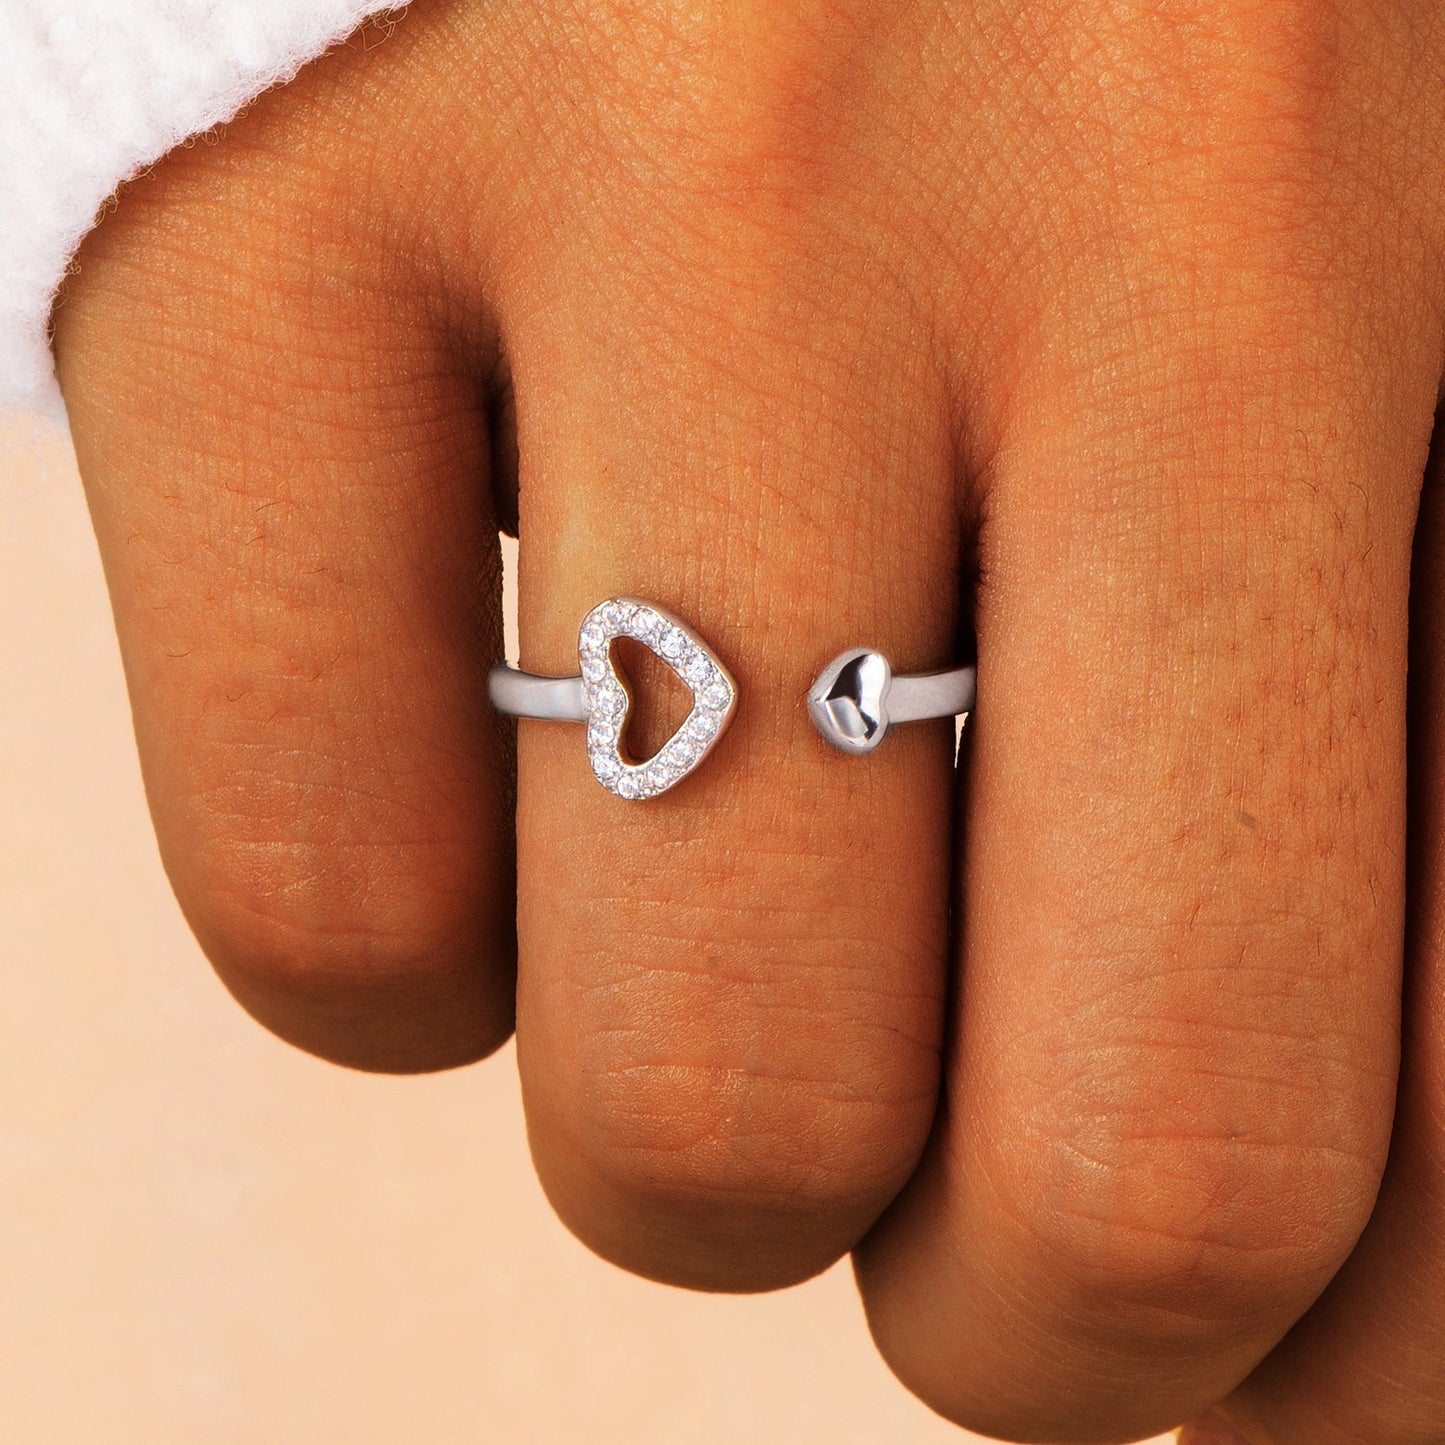 "The love between a grandmother and granddaughter is forever" Double Heart Ring